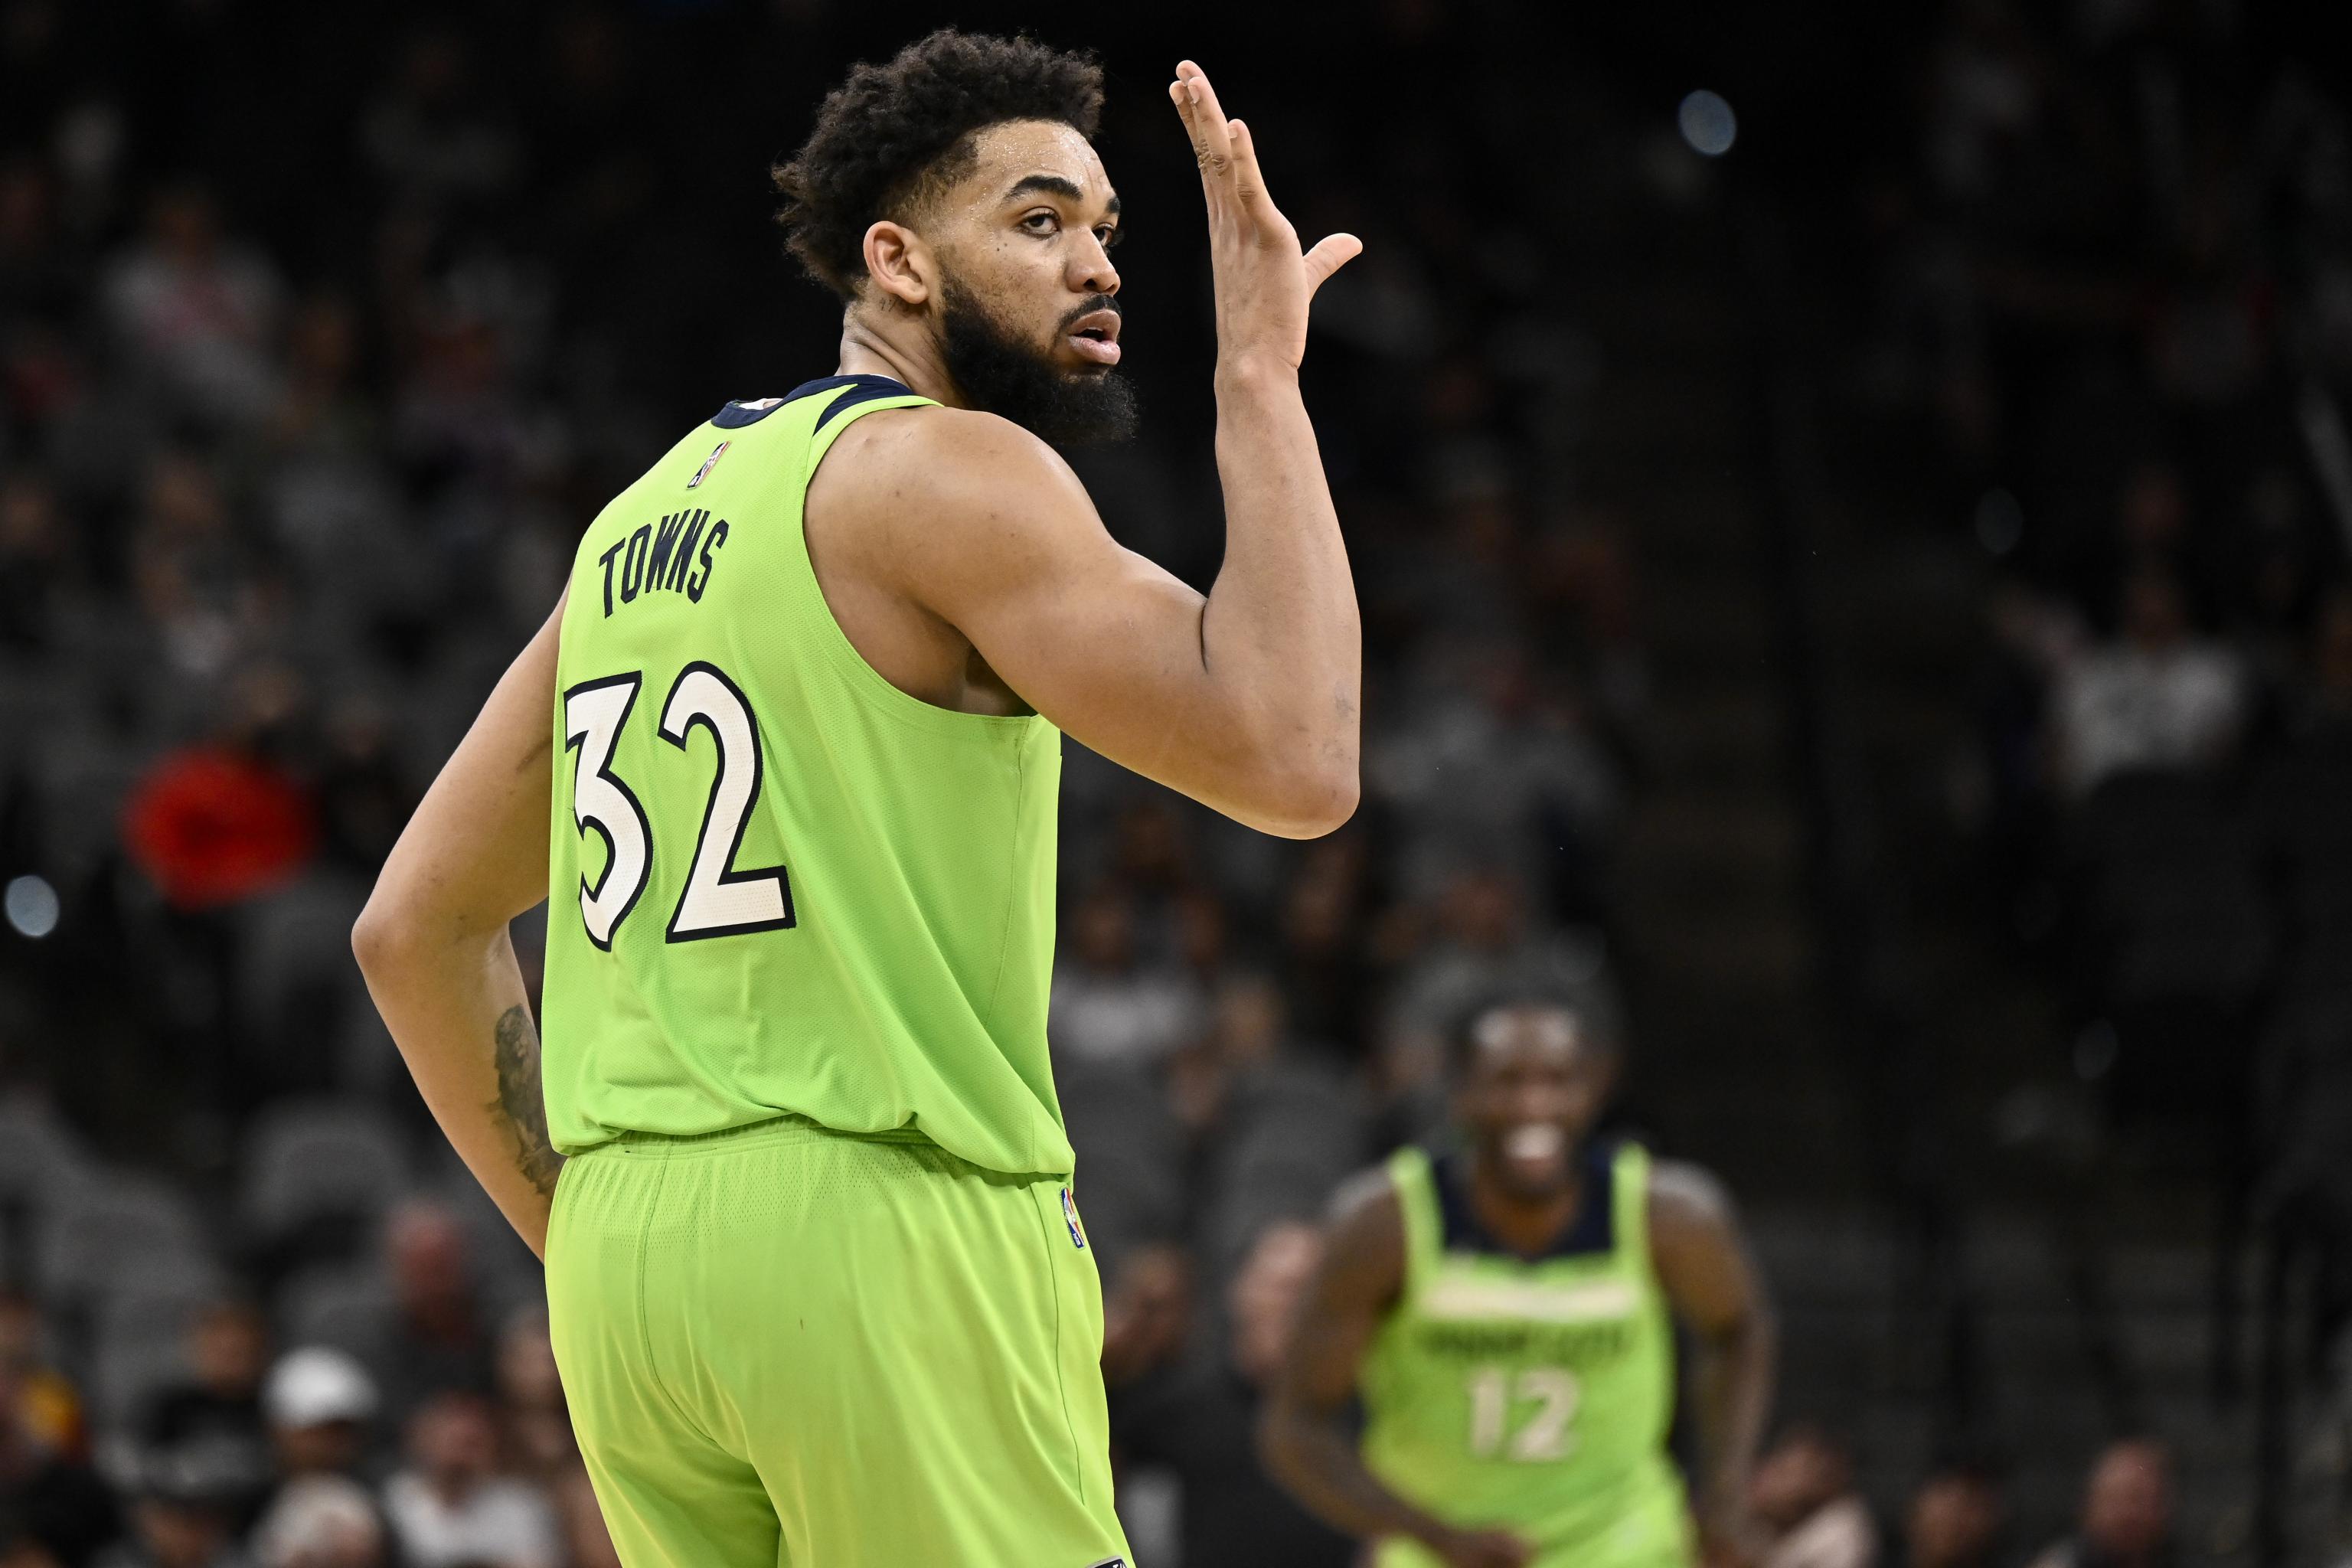 ESPN Stats & Info on X: The @Timberwolves end the NBA's longest